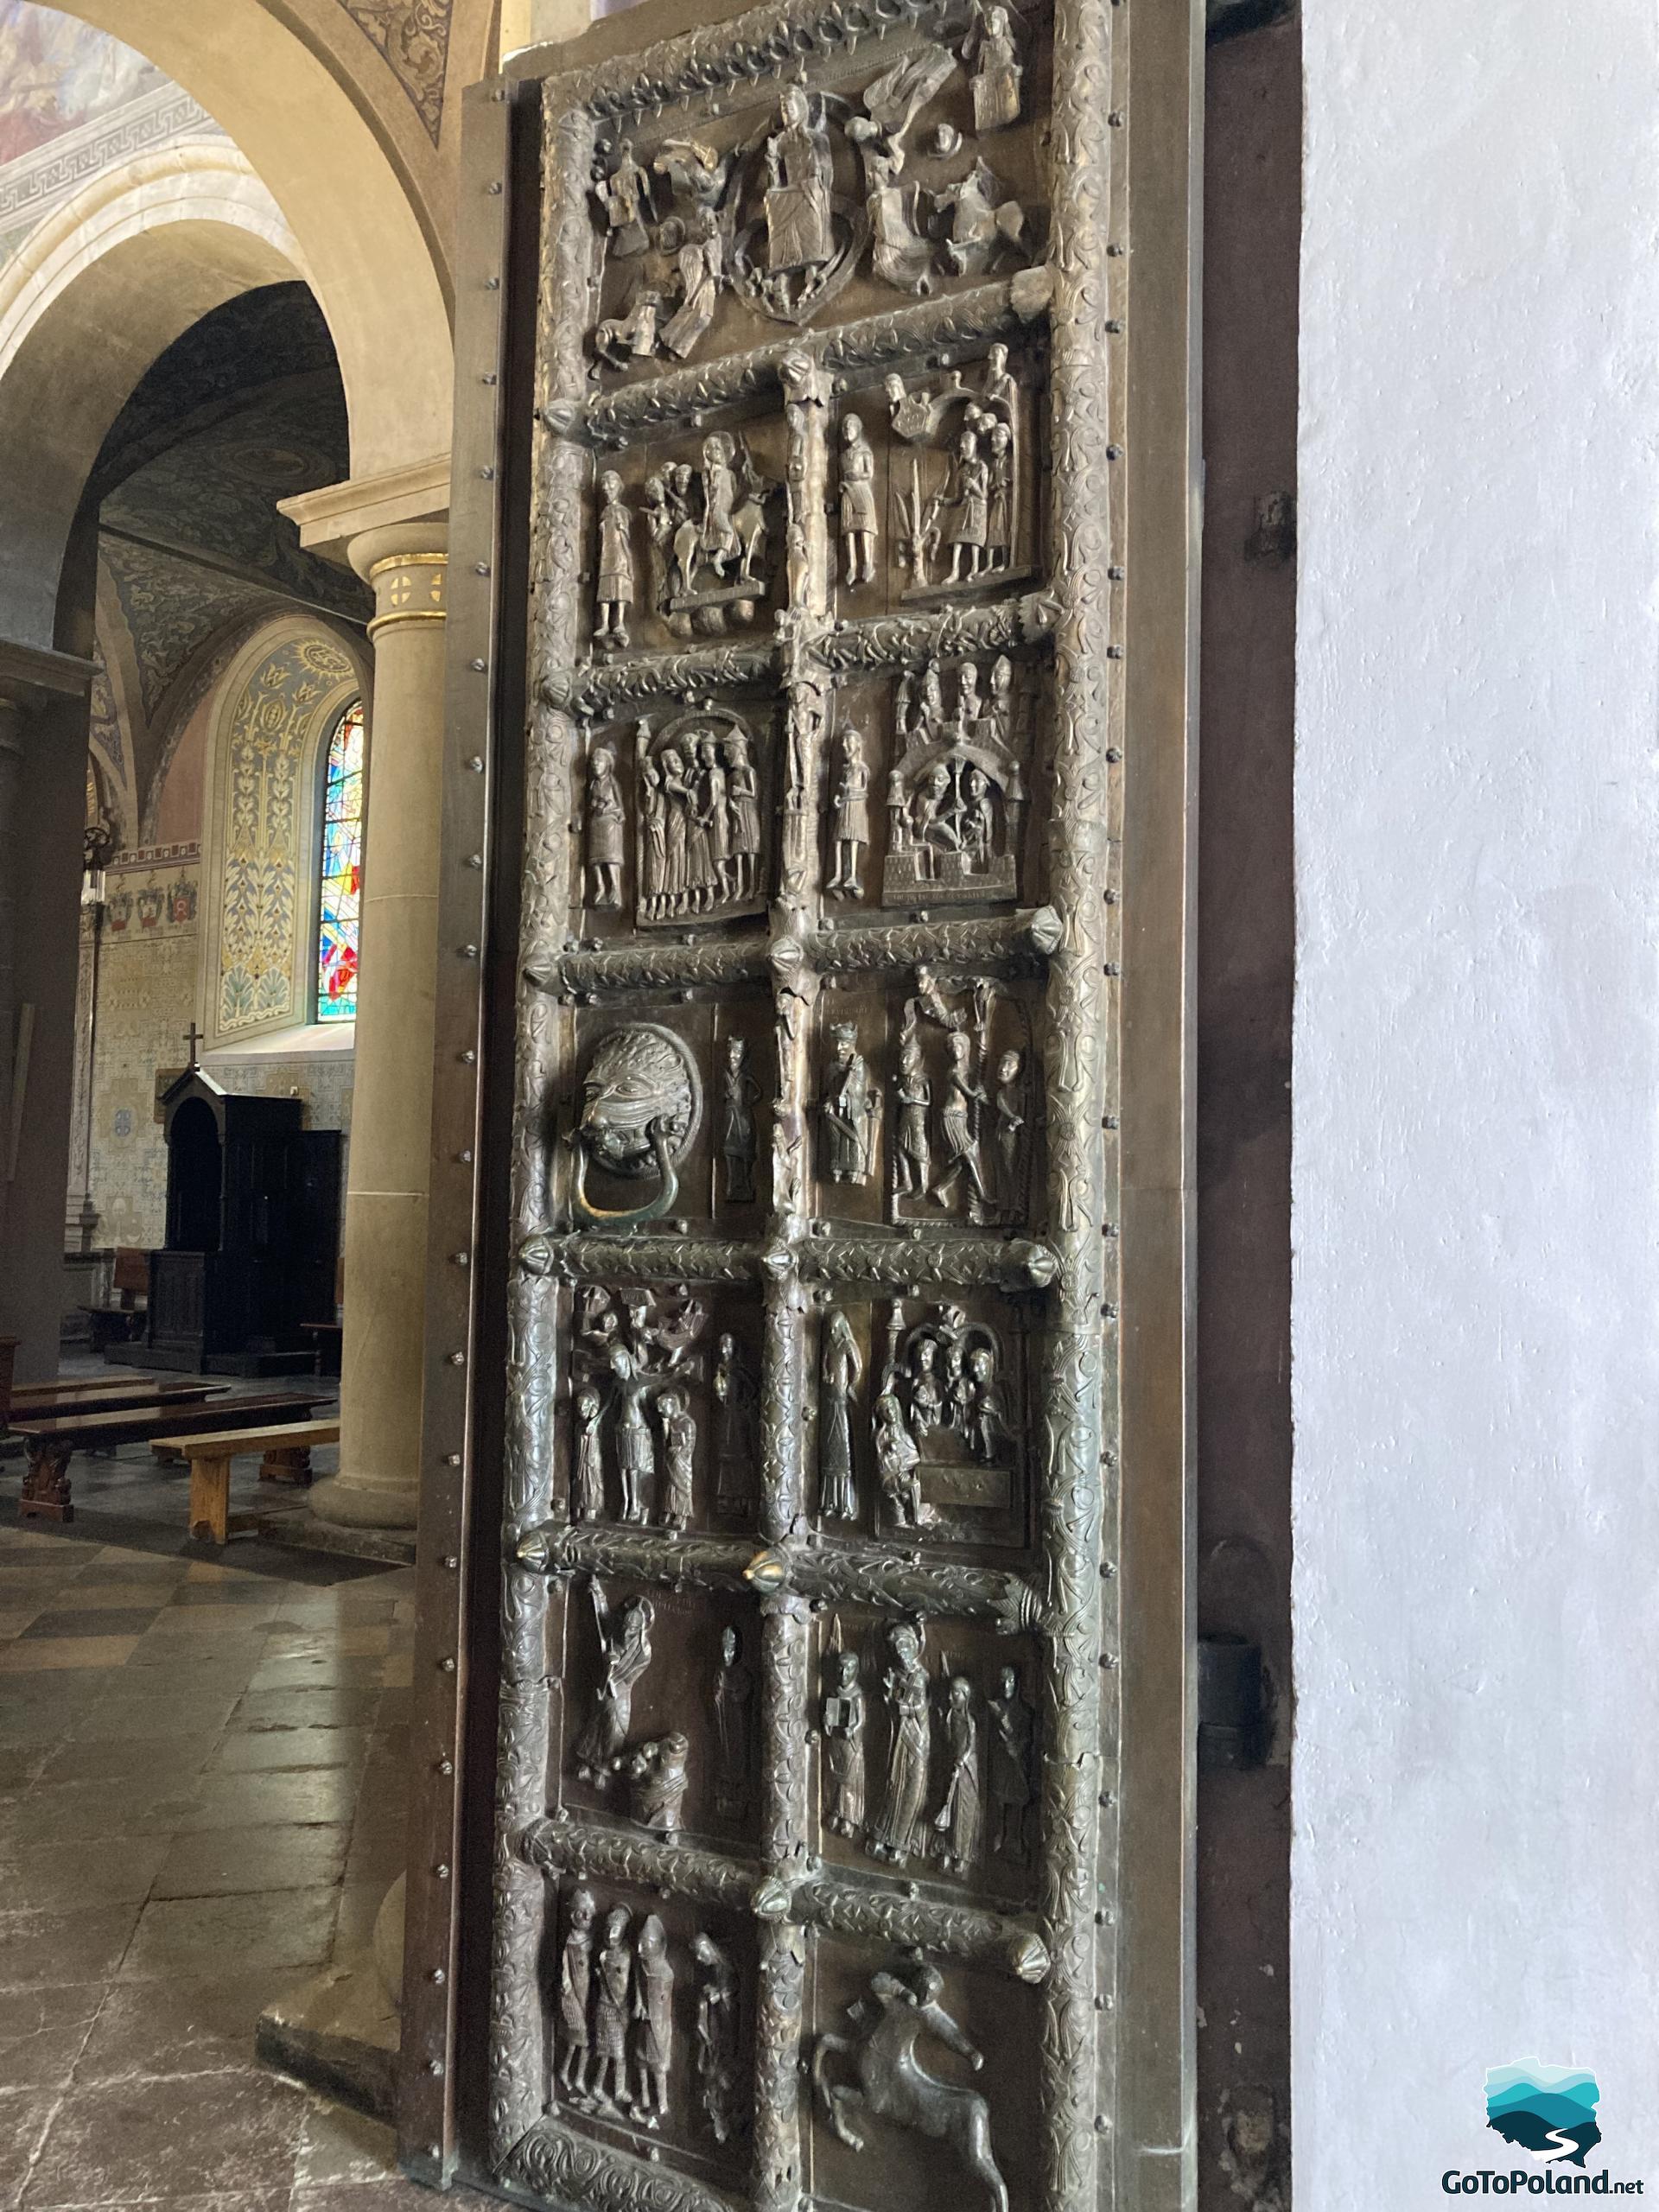 A unique door located in the entrance to the church, divided into small squares that depict various sacred scenes